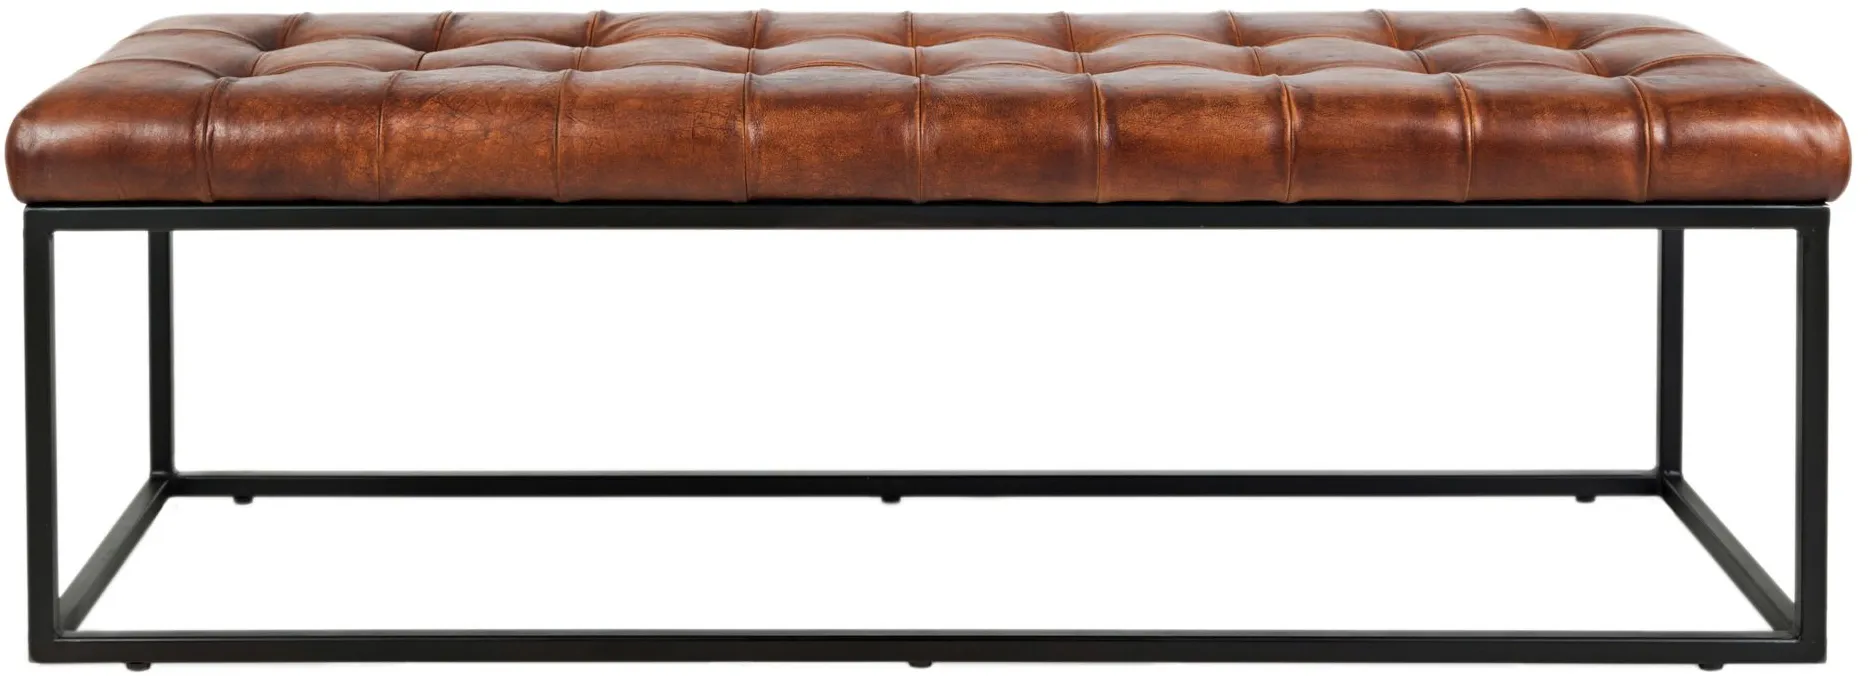 Global Furniture Archive Leather Bench in Brown / Saddle by Jofran